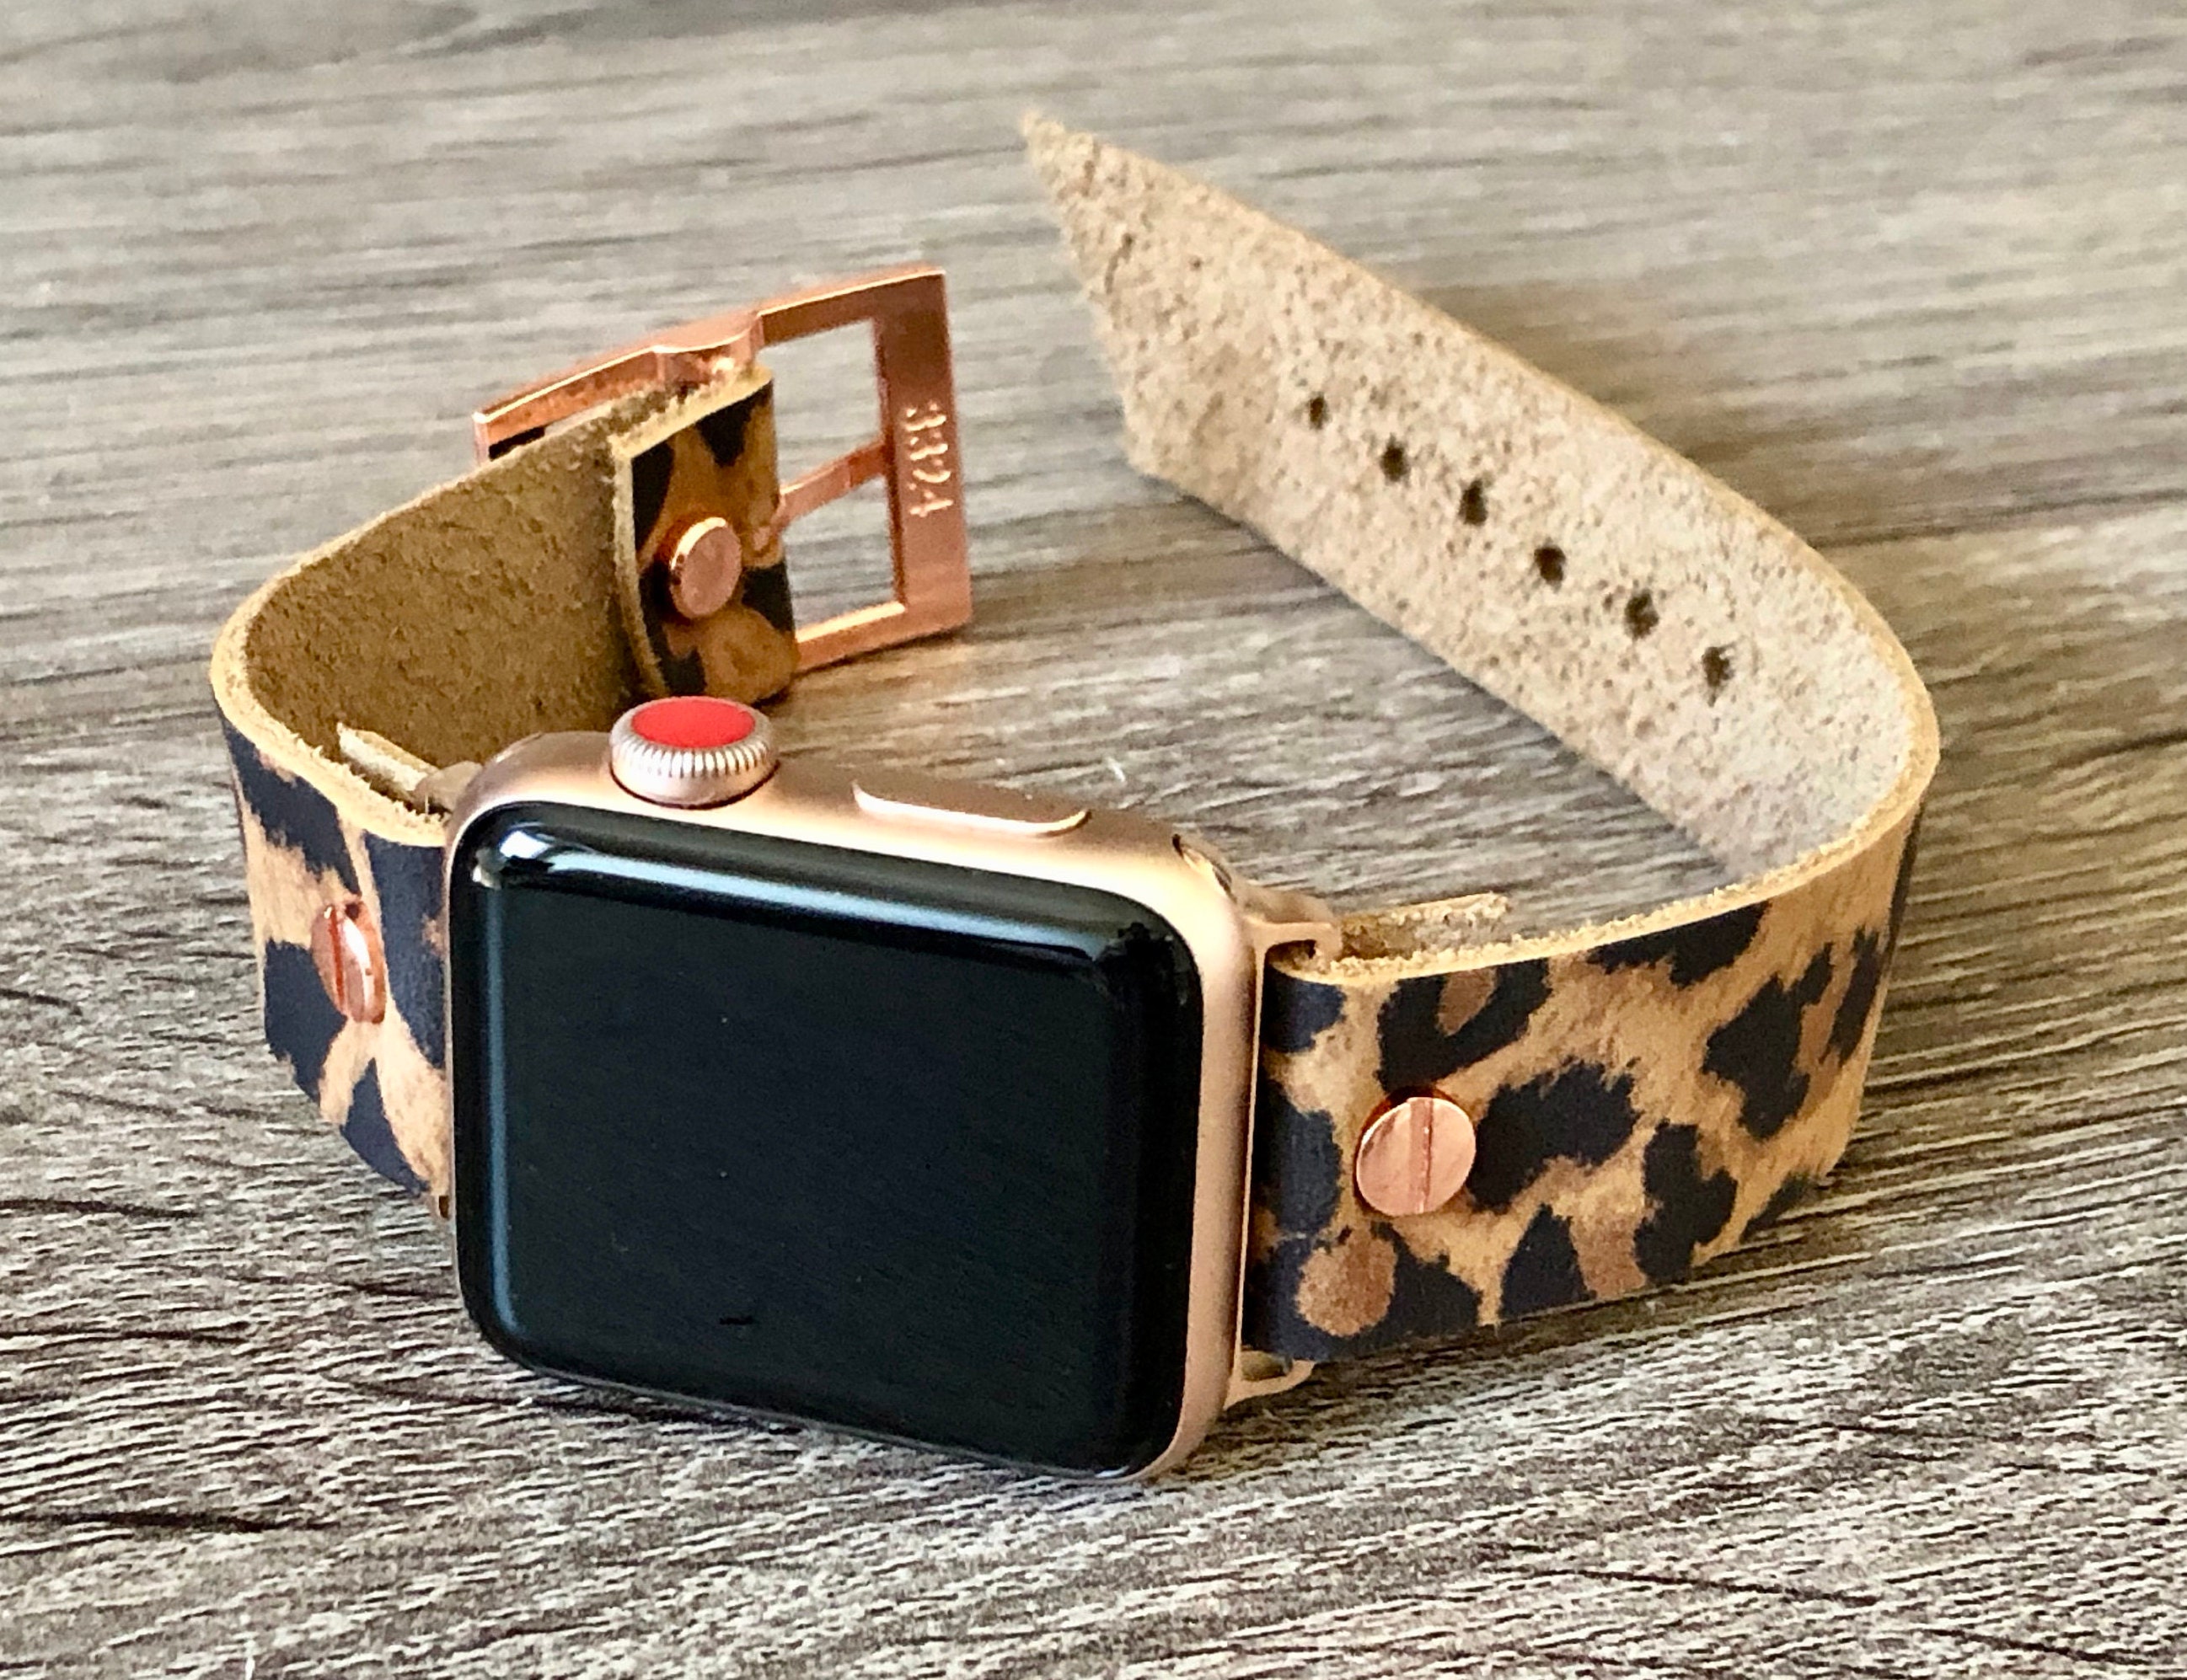 Buy Wholesale China Wholesale Leopard Design Soft Silicone Waterproof Watch  Band For Iwatch,fashion Stylish Wristband For Men,women & Iwatch Apple  Watch Bands at USD 1.86